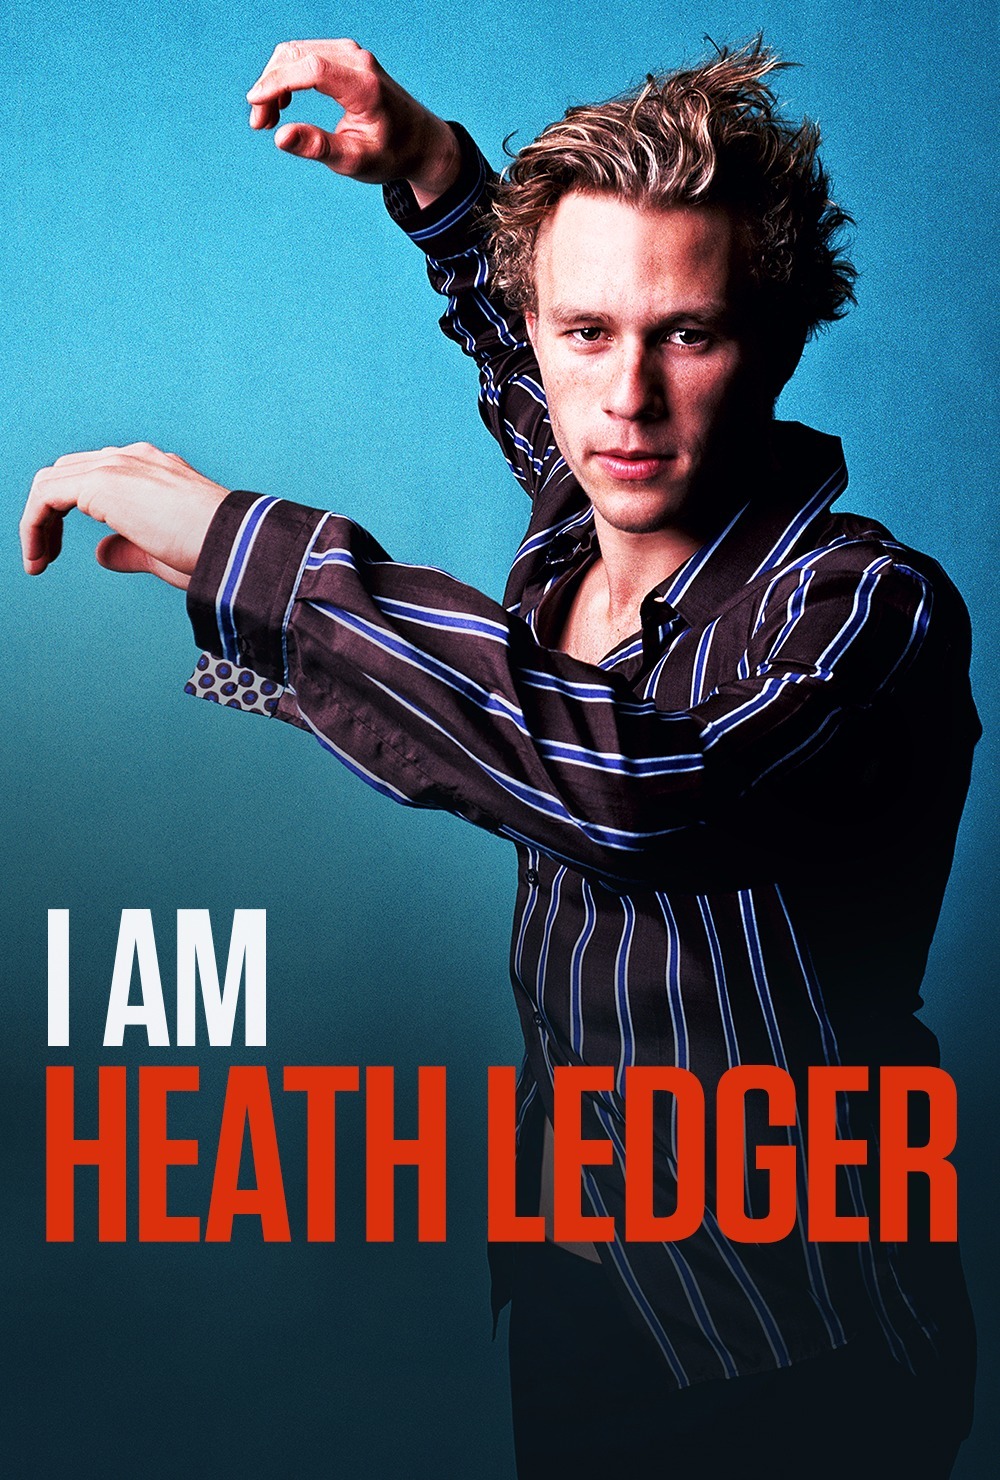 10 Best Heath Ledger Movies: Remembering His Most Memorable Movie Roles